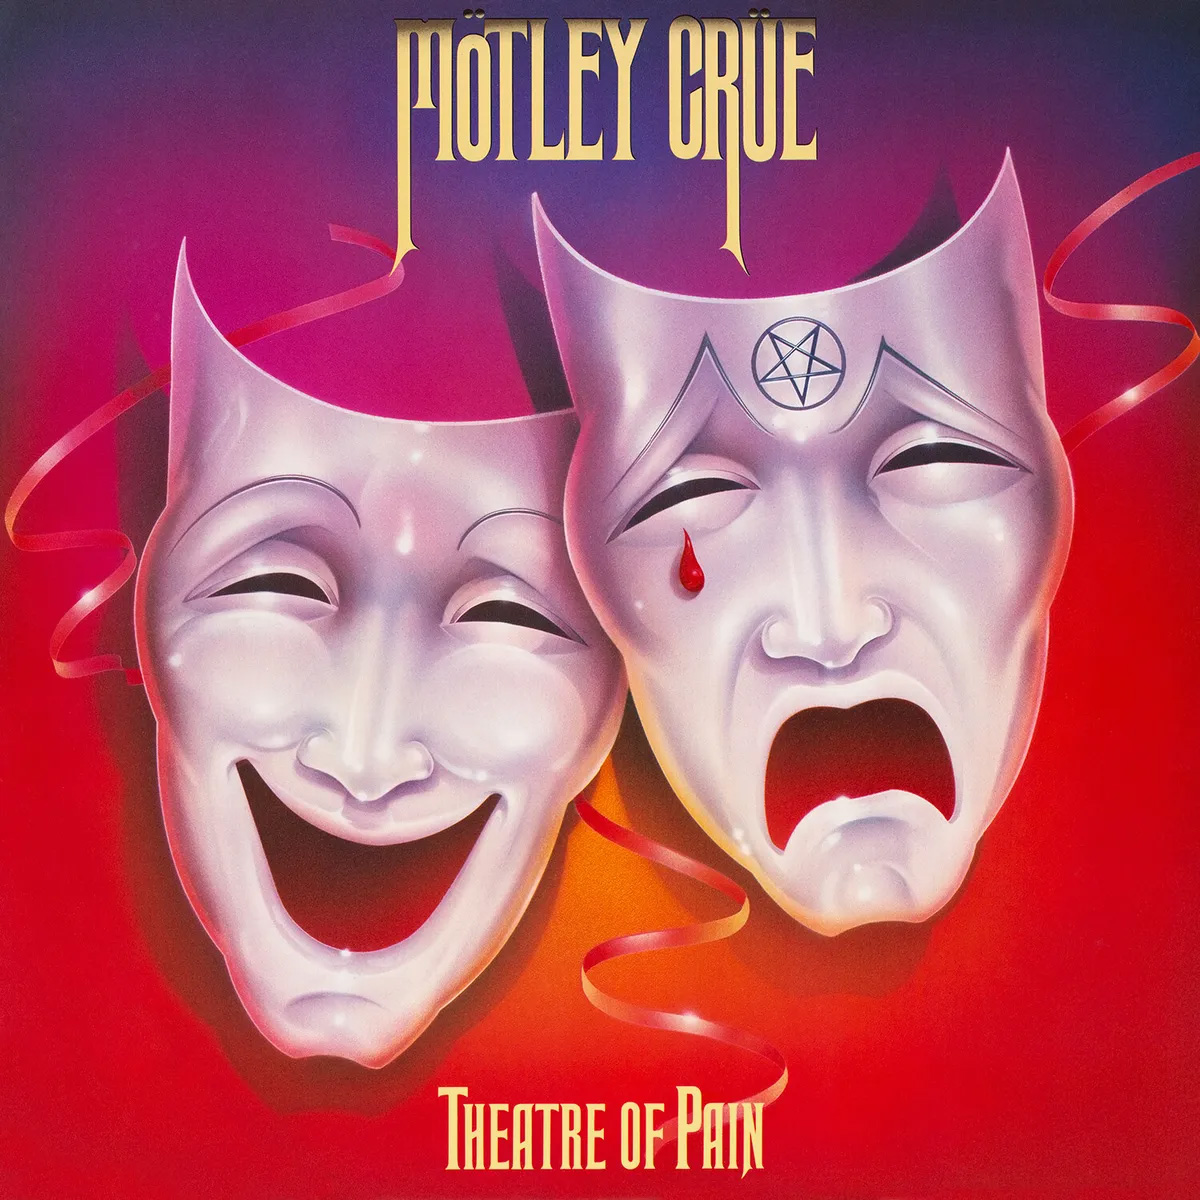 Theatre of Pain cd cover